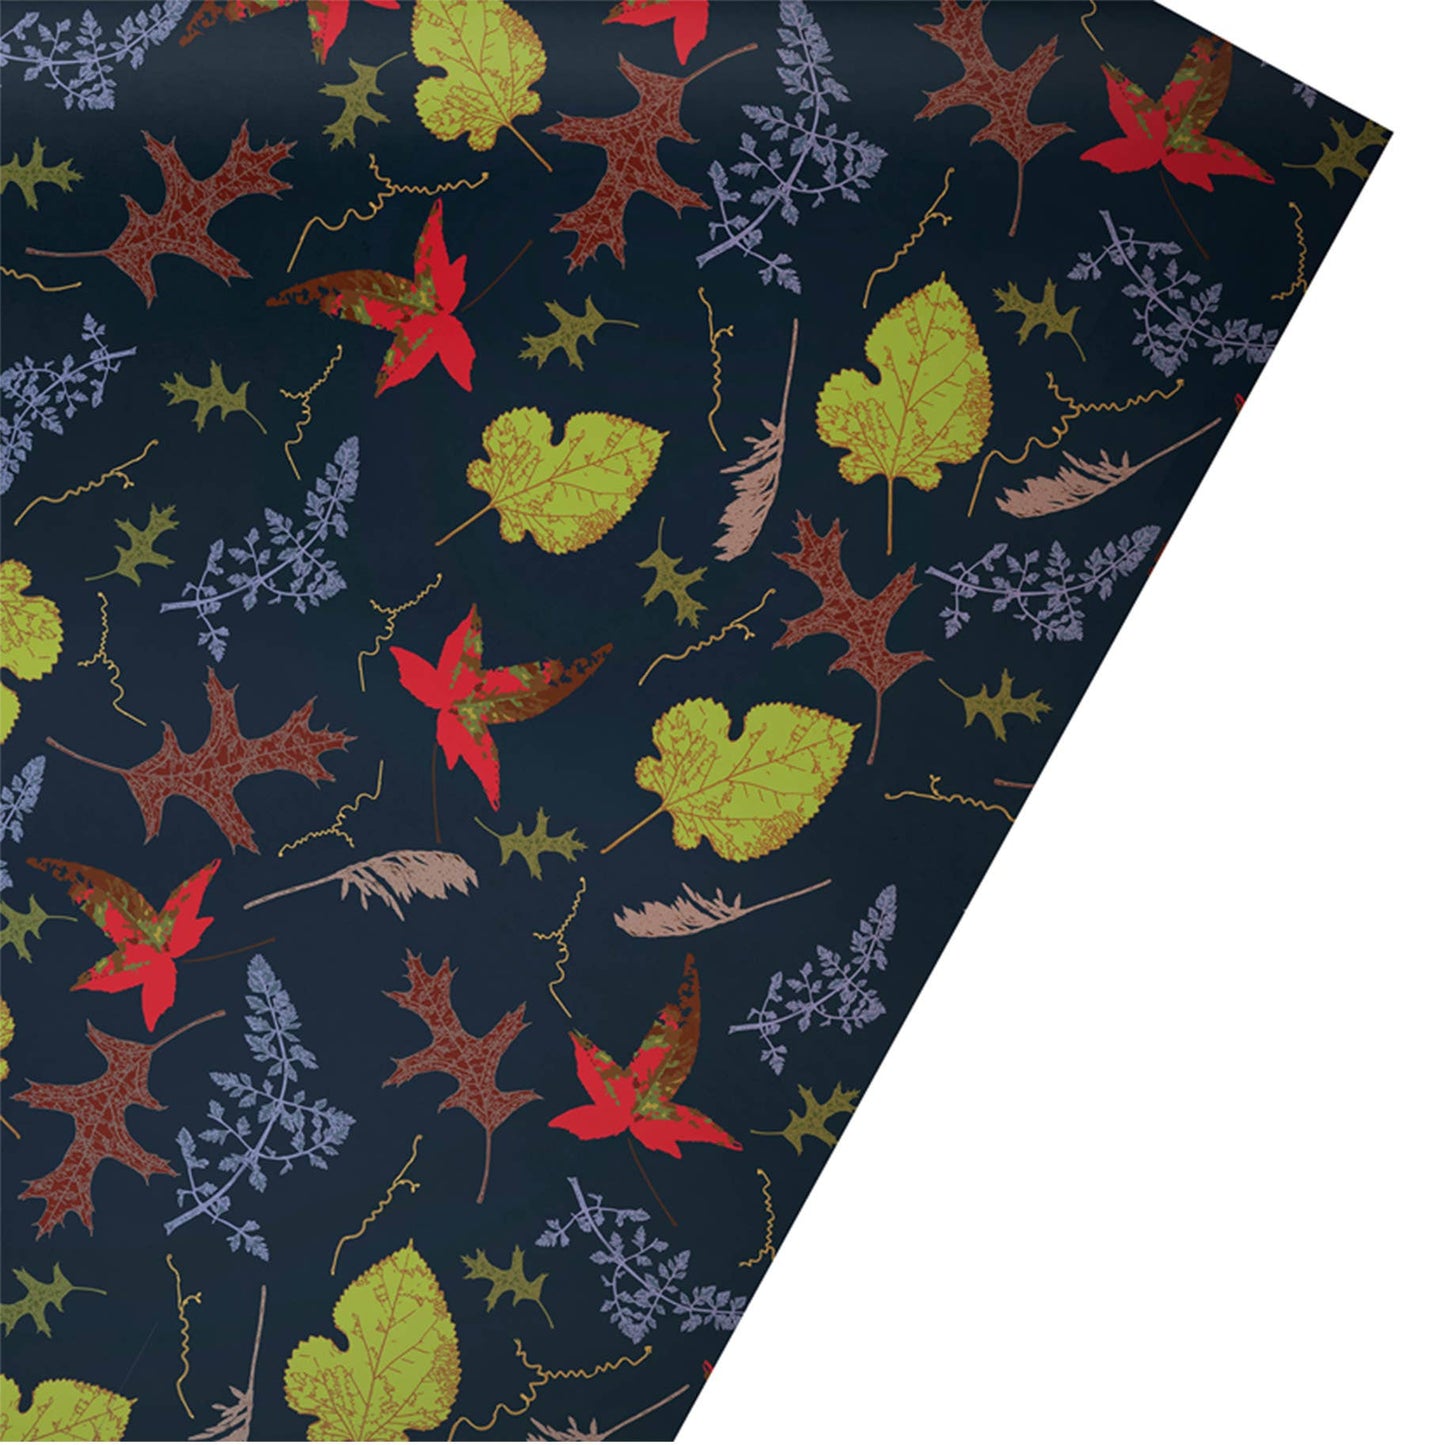 Autumn Toss on Teal wrapping paper